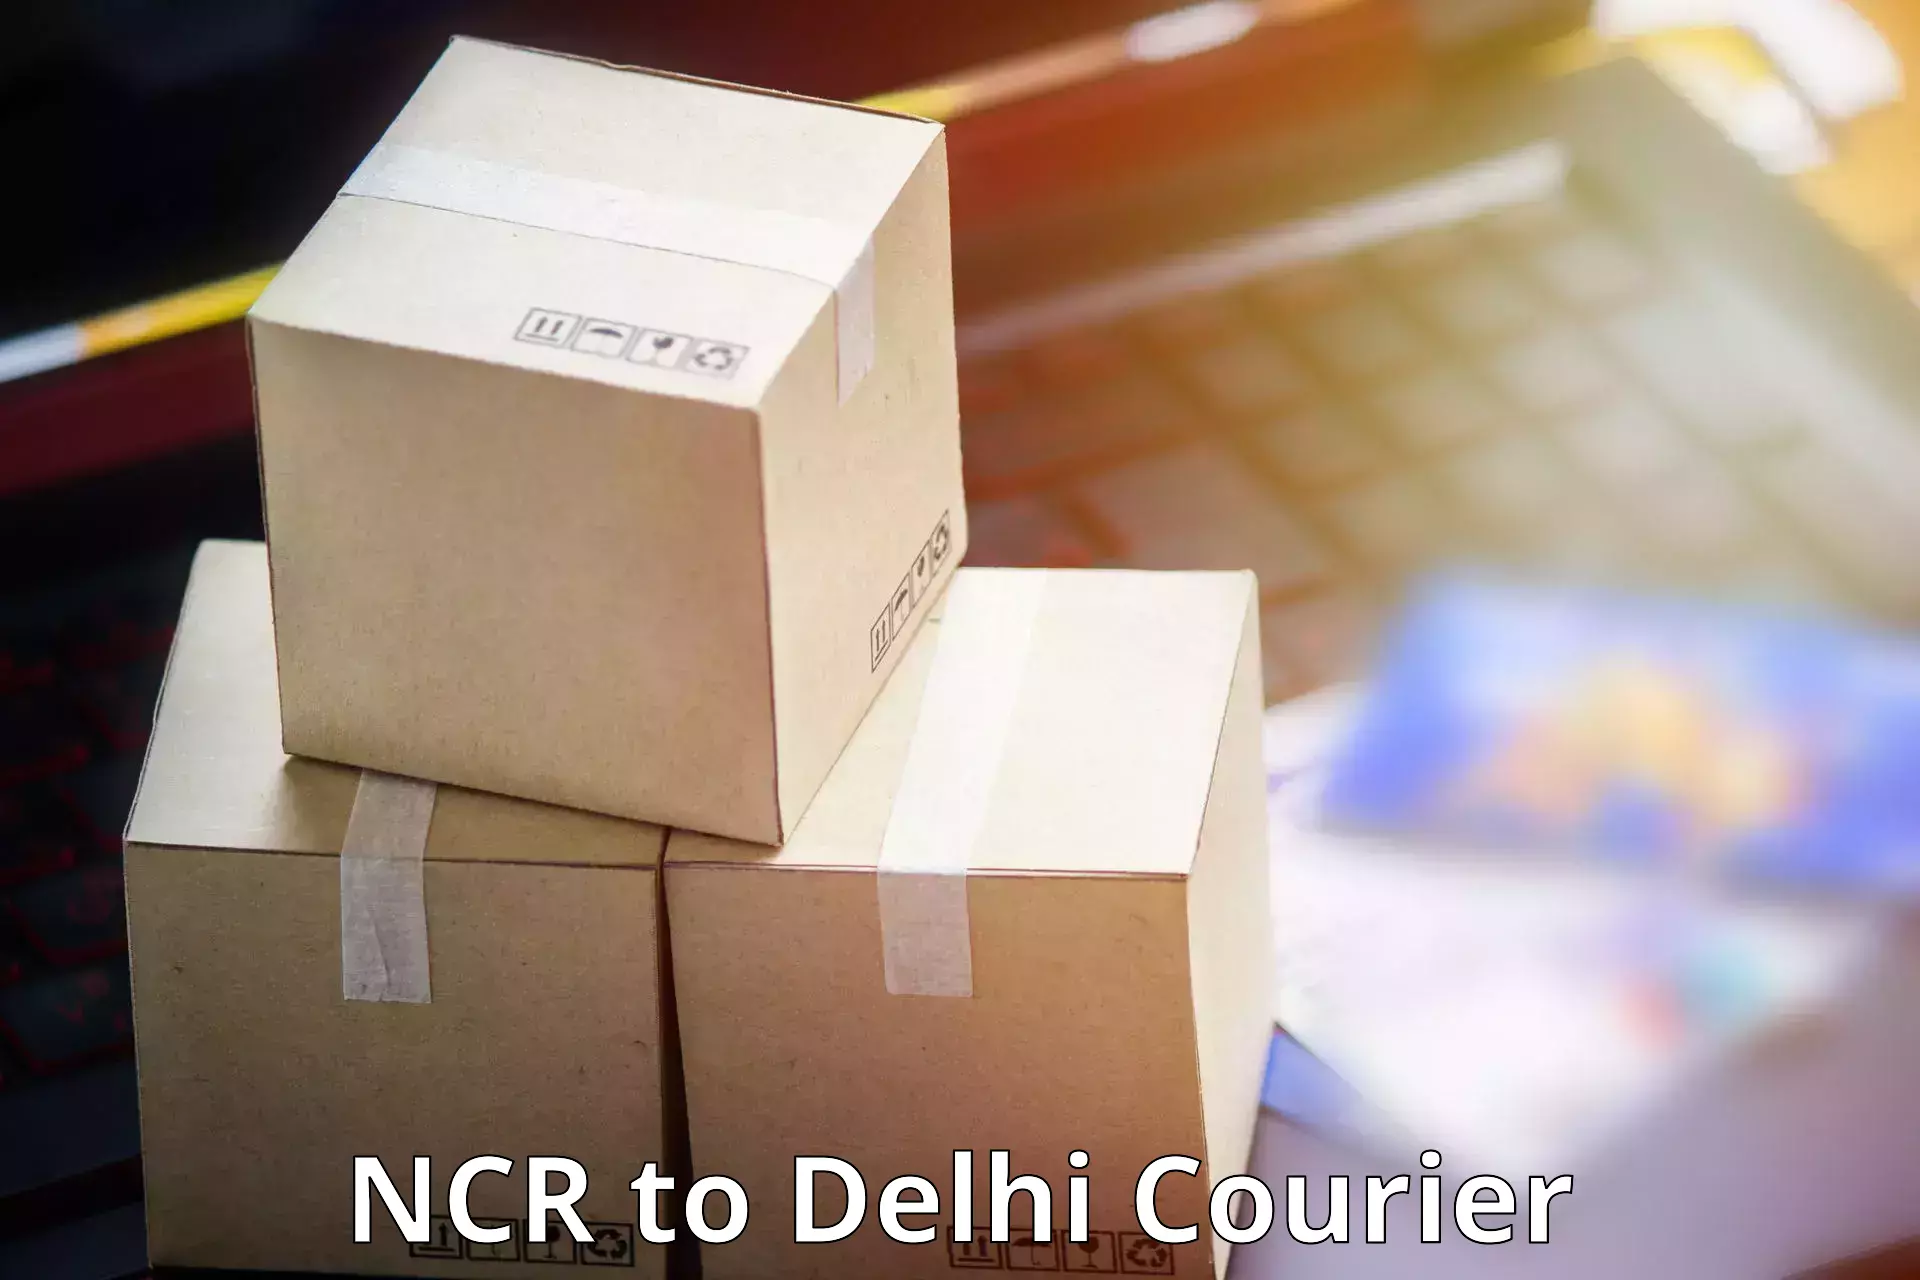 24/7 courier service in NCR to Jawaharlal Nehru University New Delhi